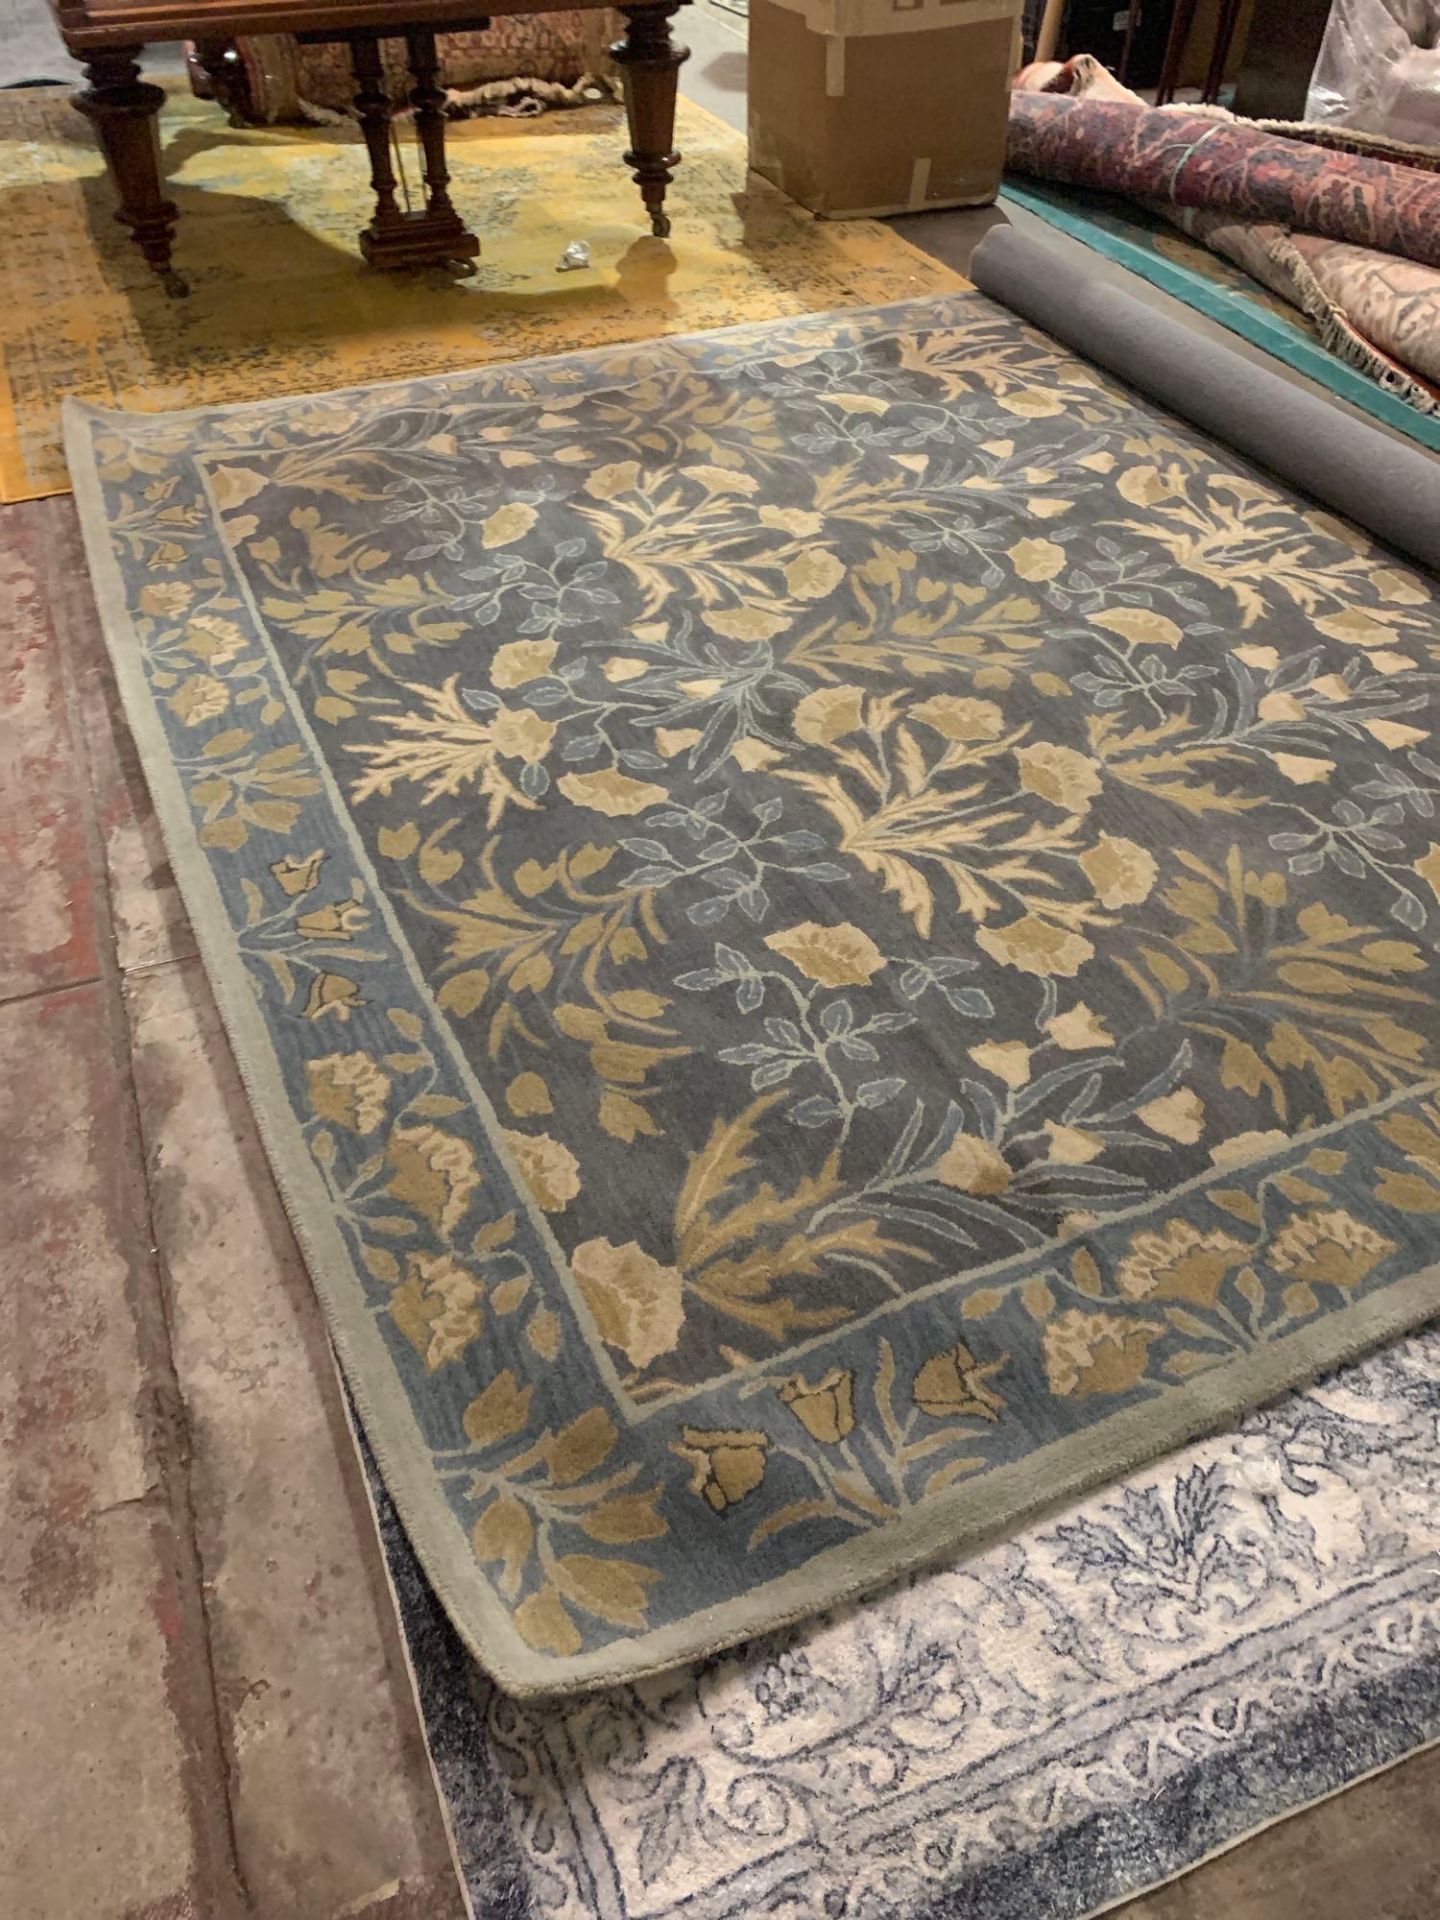 Nain Floral Ziegler Blue Area Rug Hand Tufted High Quality Wool Made Of 100% Wool Pile Ziegler - Image 5 of 8